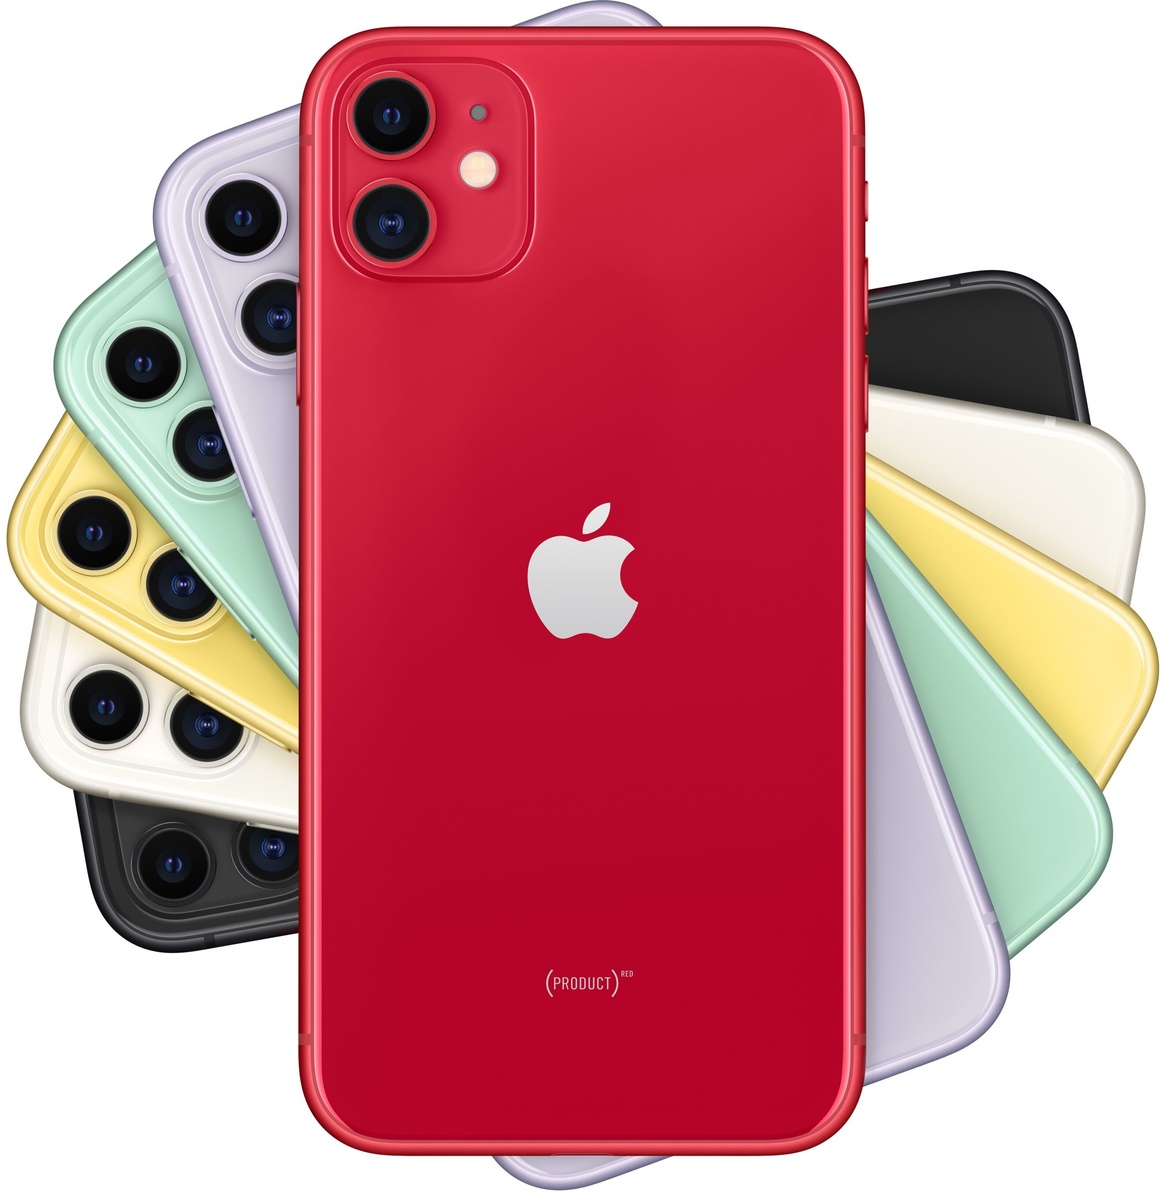 iPhone 11 128 Red MWLG2